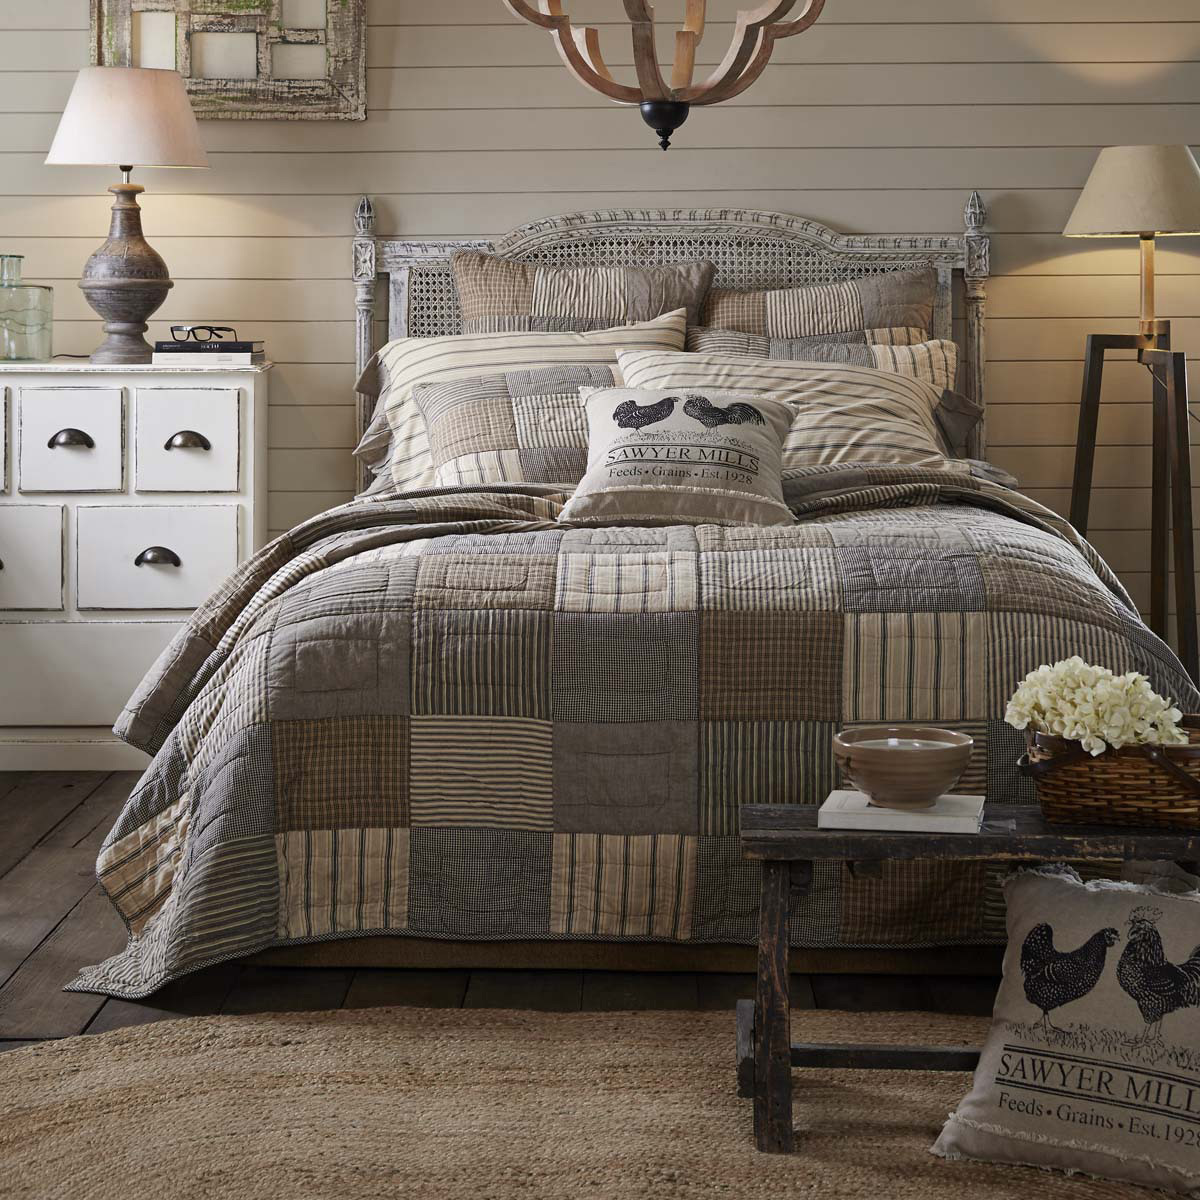 Sawyer Mill Quilt, by VHC Brands.